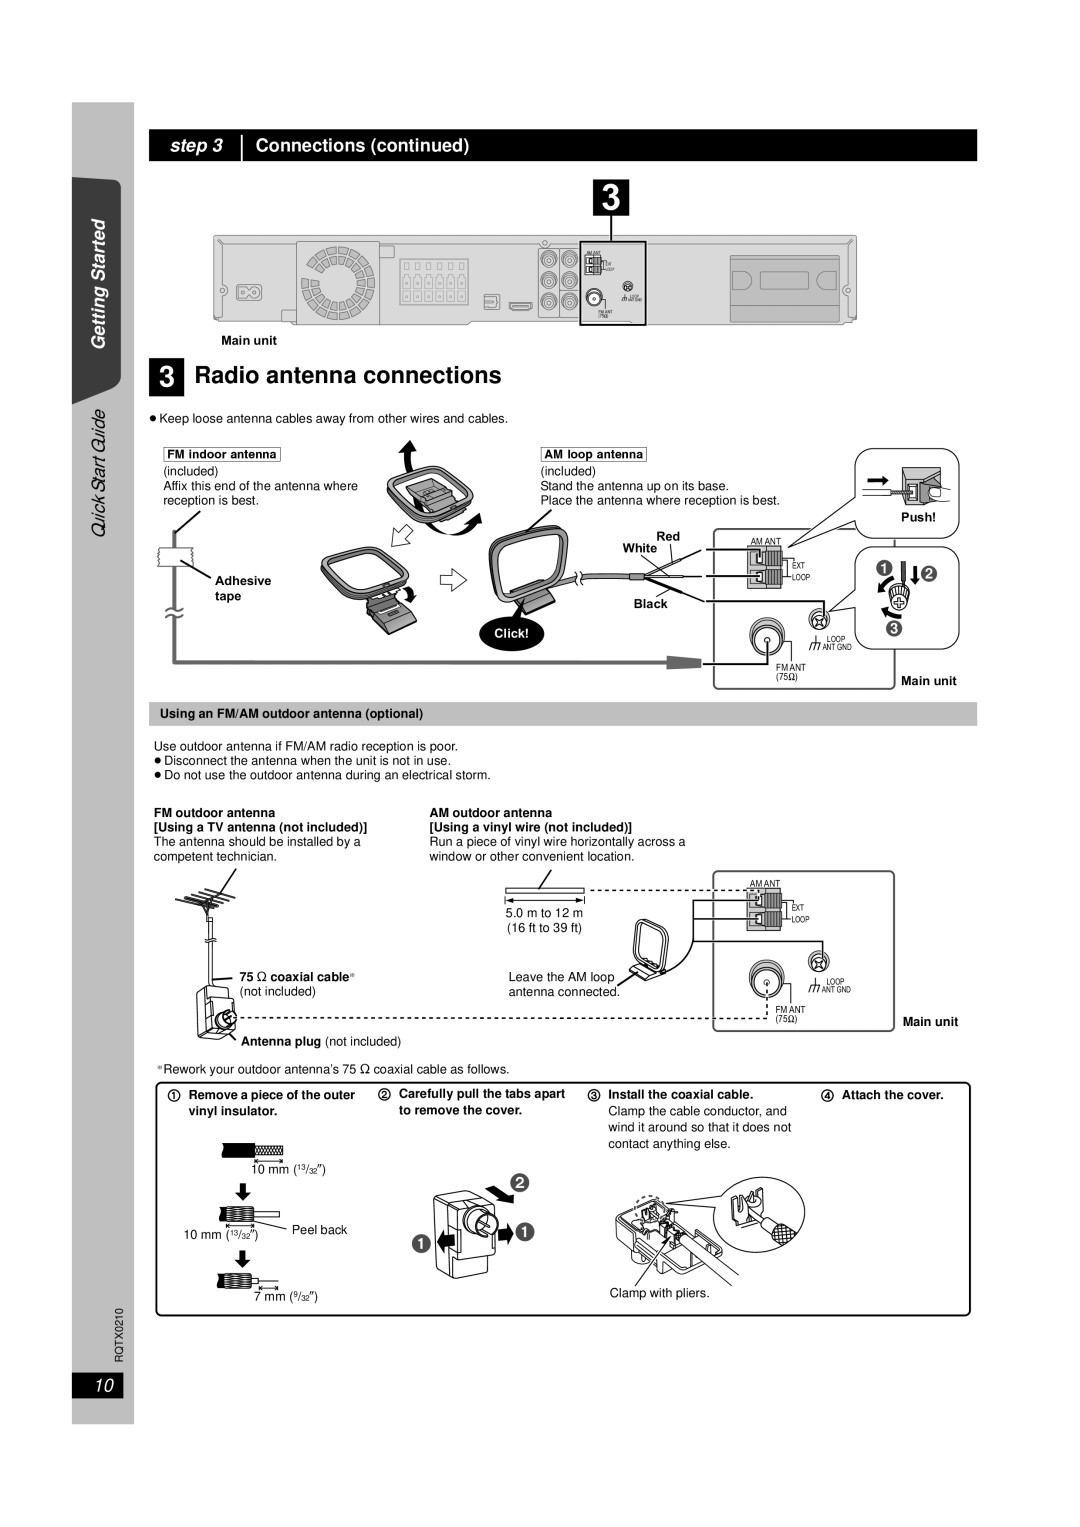 Panasonic SC-PT670 manual Radio antenna connections, Guide Getting Started, Connections continued, Quick Start, step, Click 